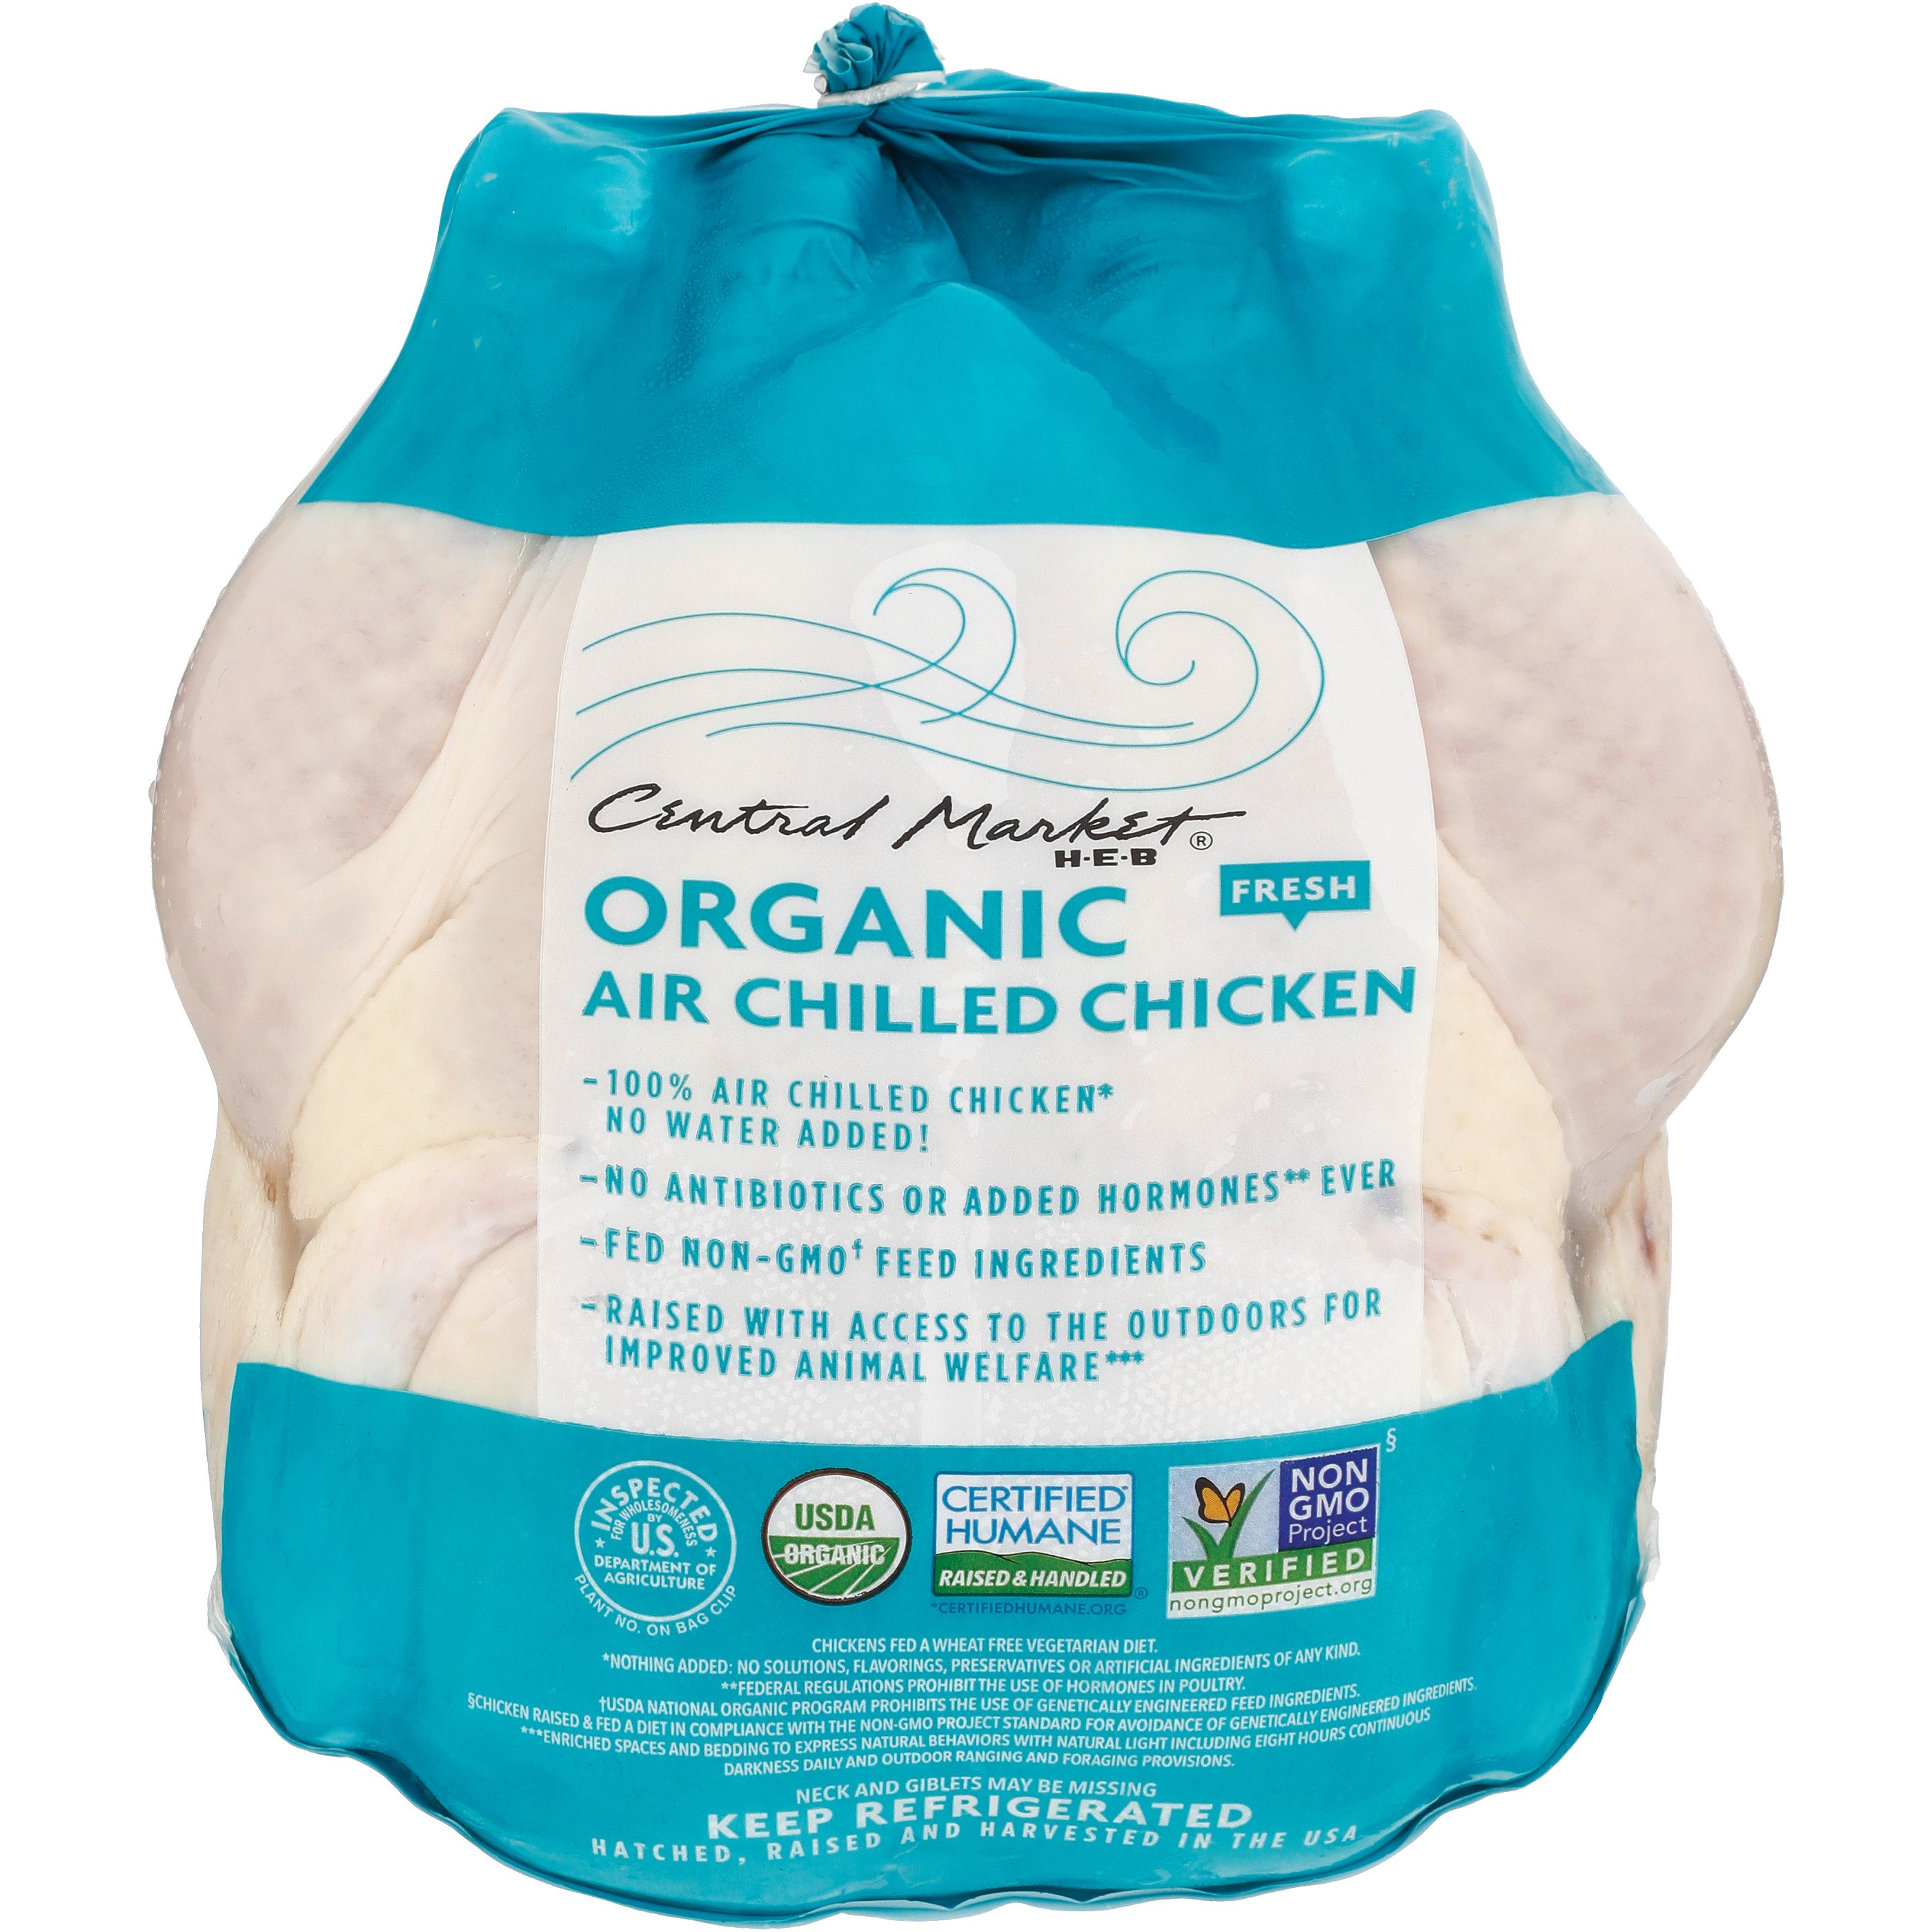  Free-range Whole Young Chicken Certified Humane NON